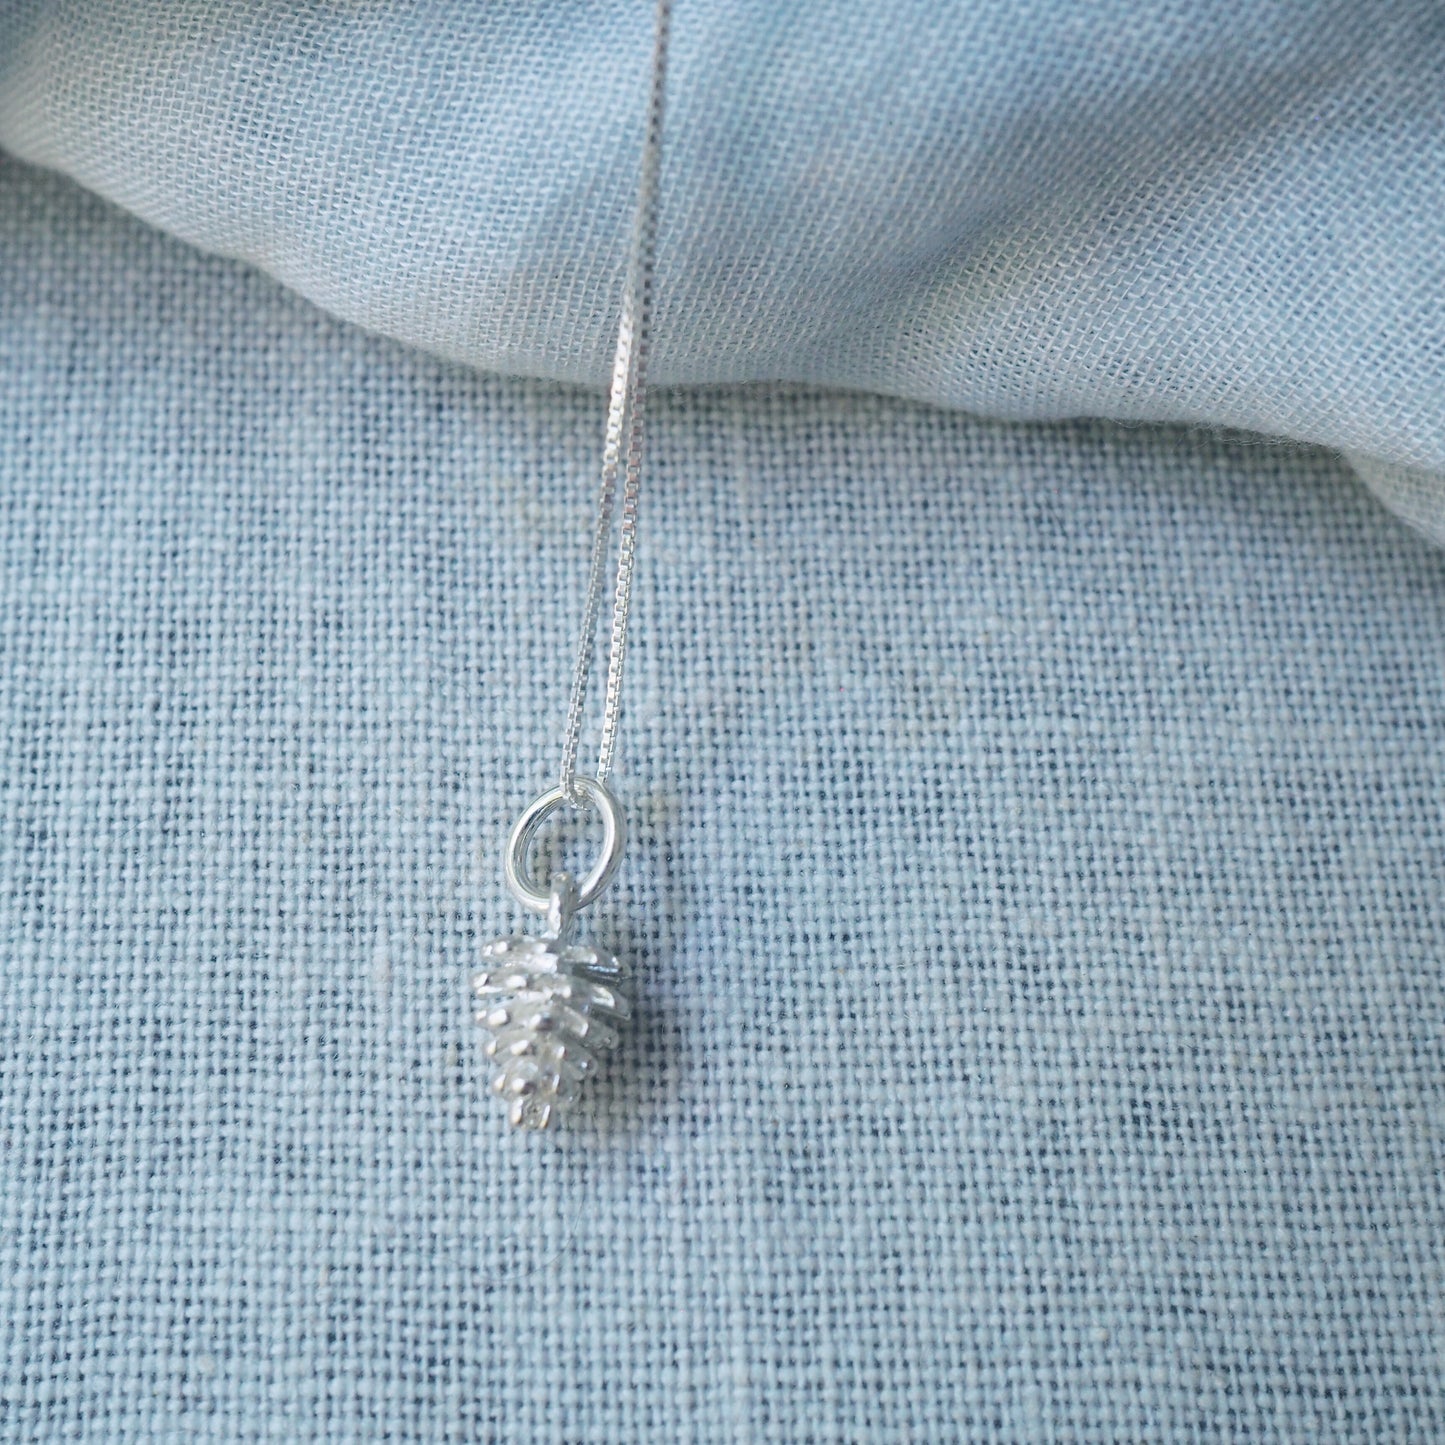 Pinecone Charm Silver Necklace